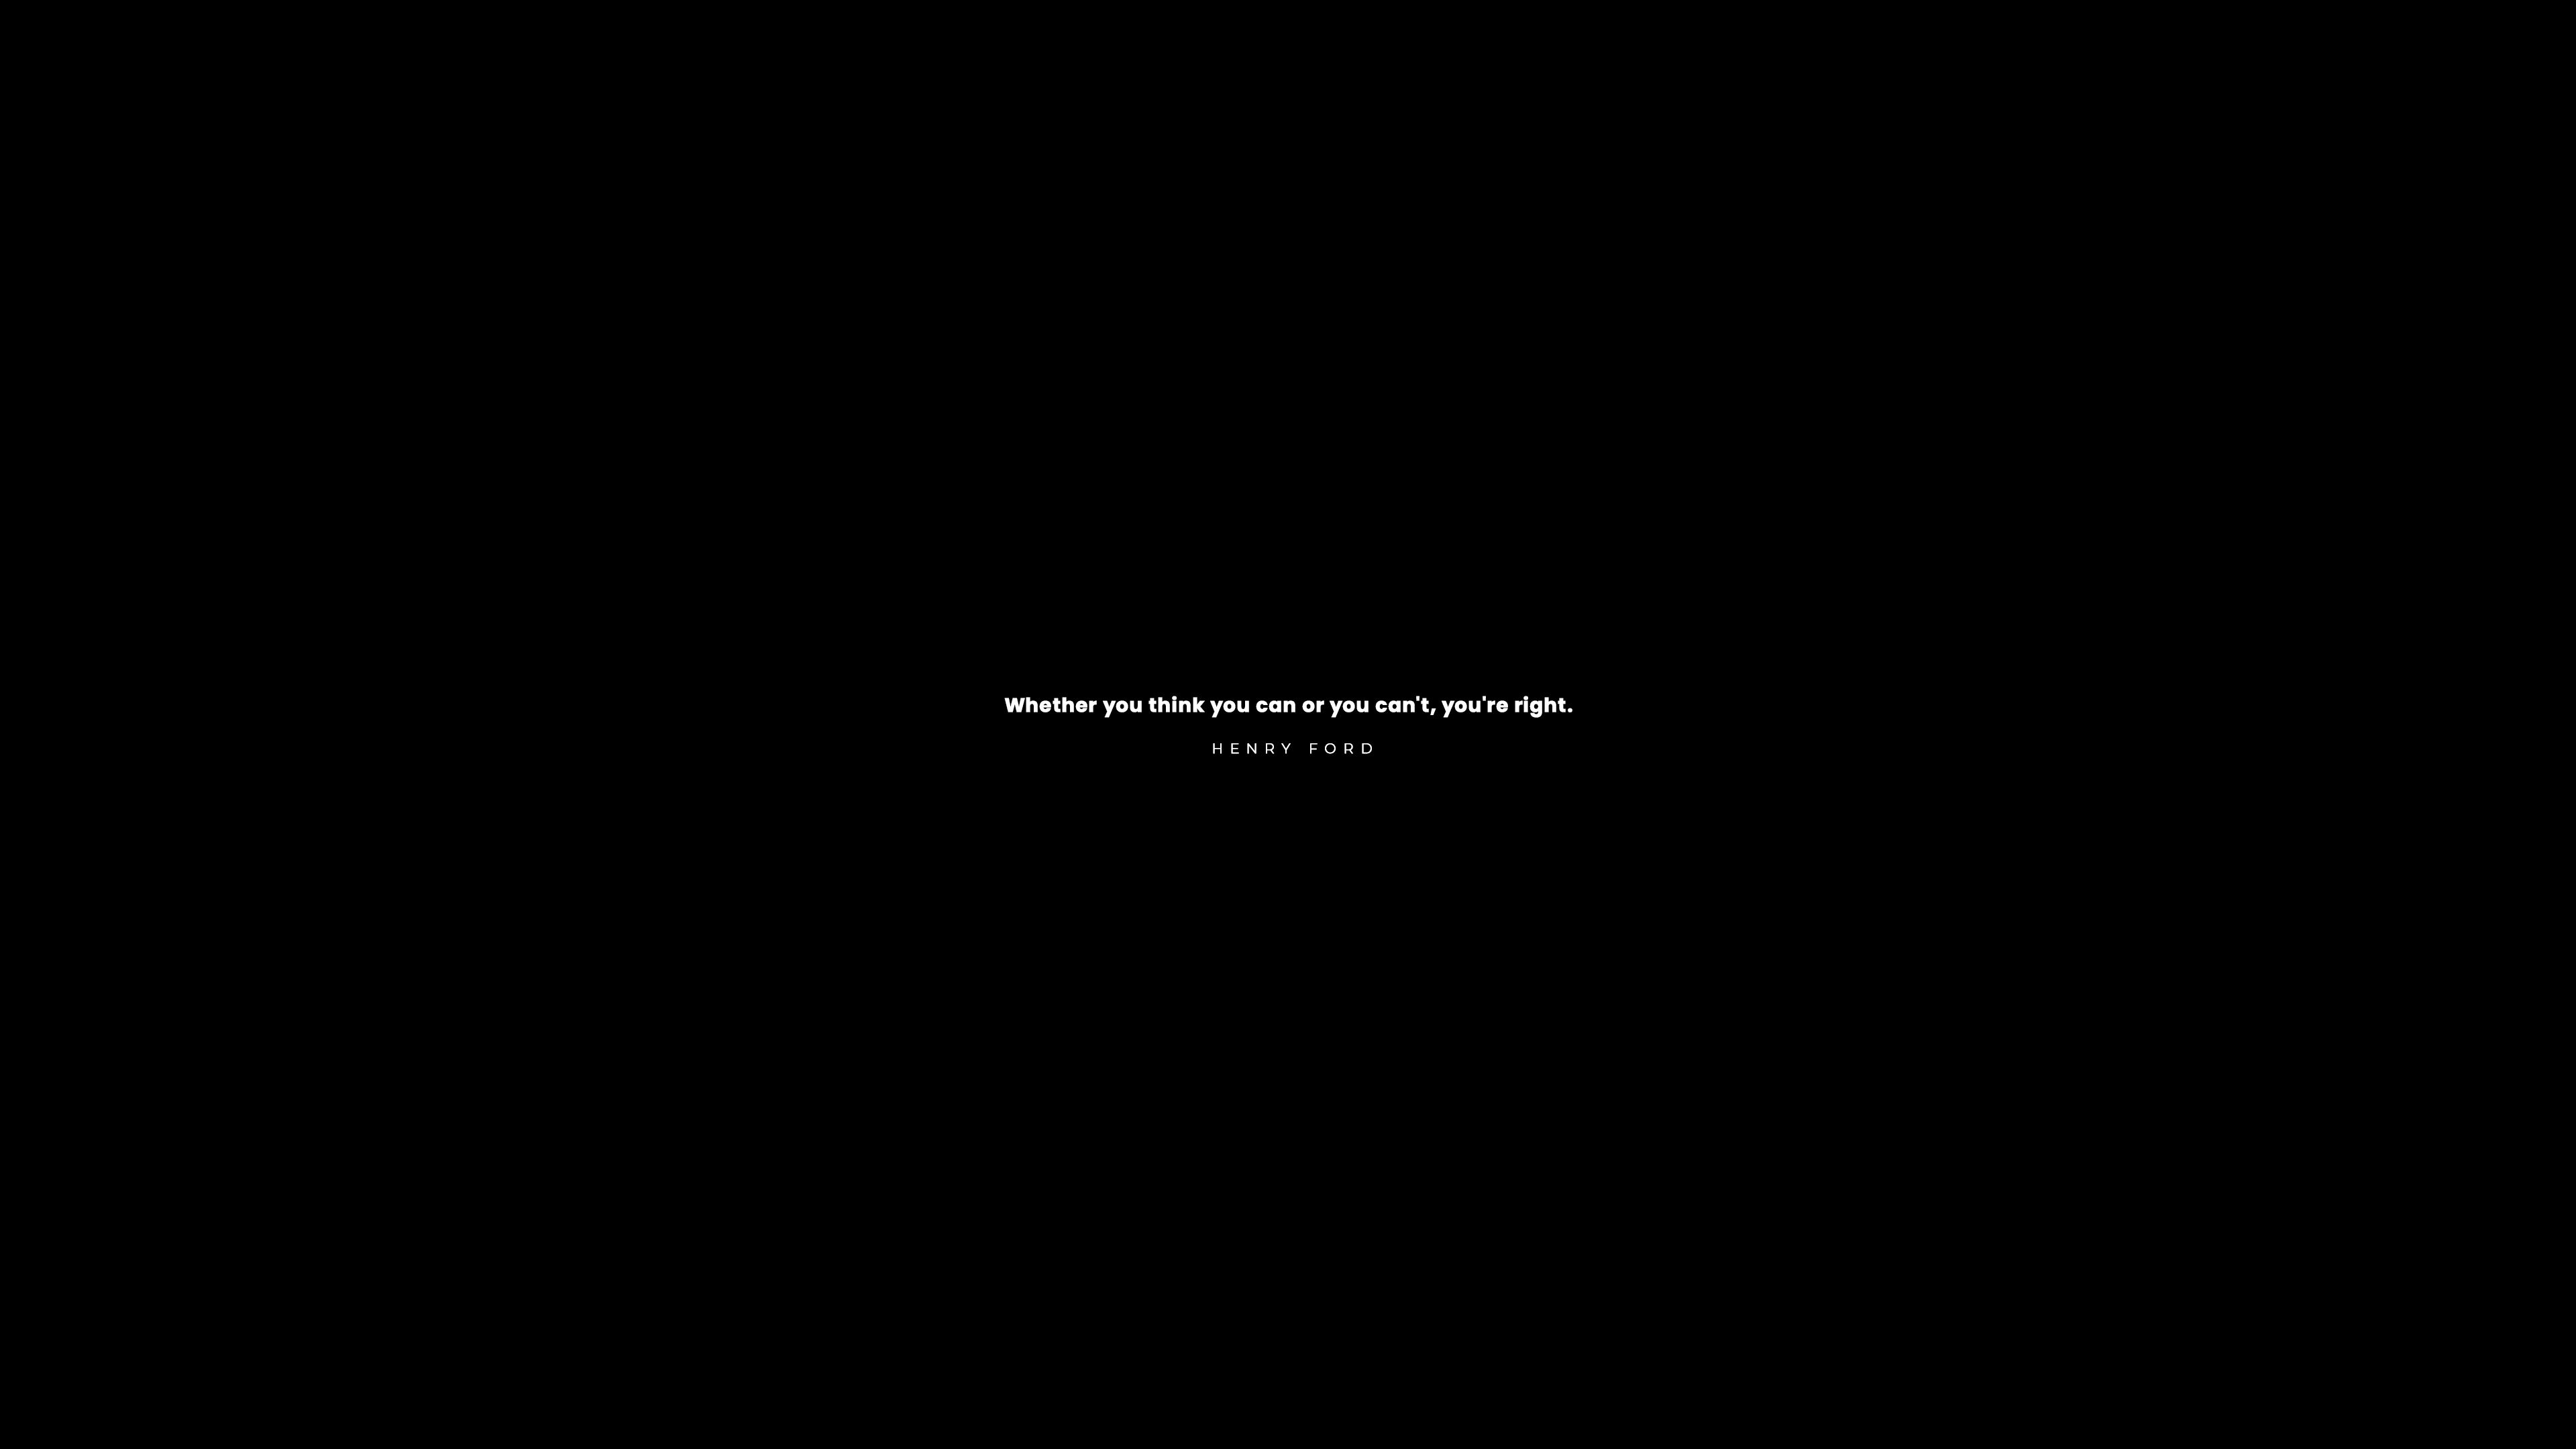 The black screen with a white text on it - Motivational, sad quotes